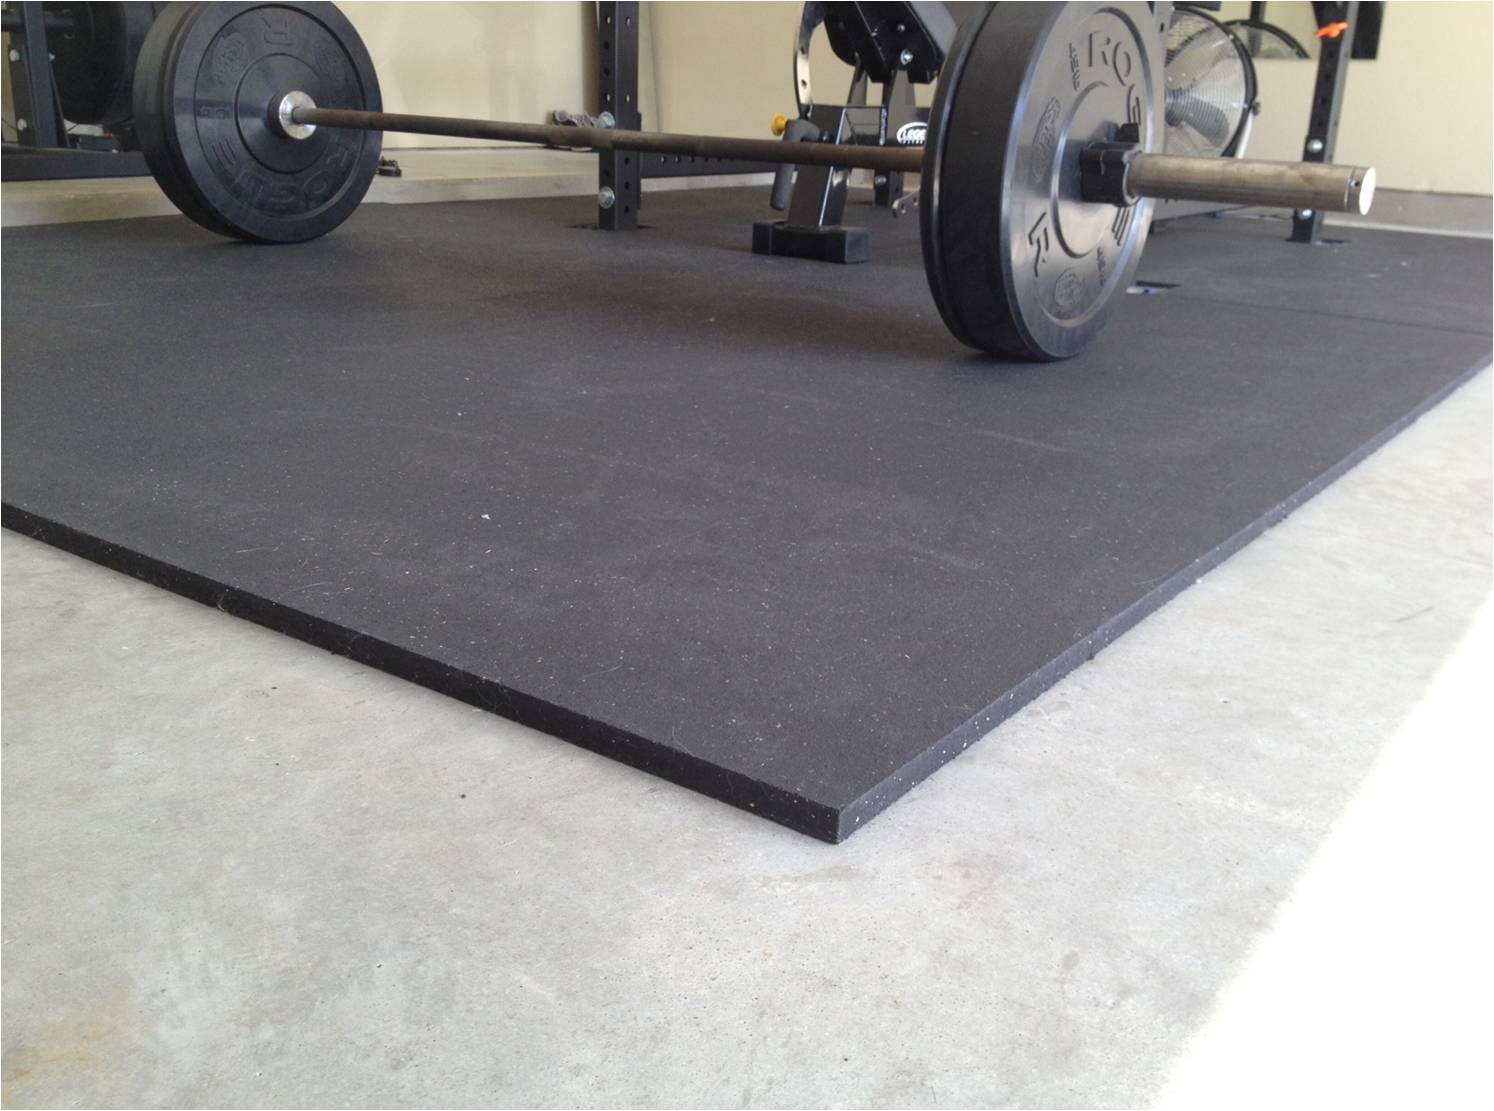 Gym Weight Rubber Tile